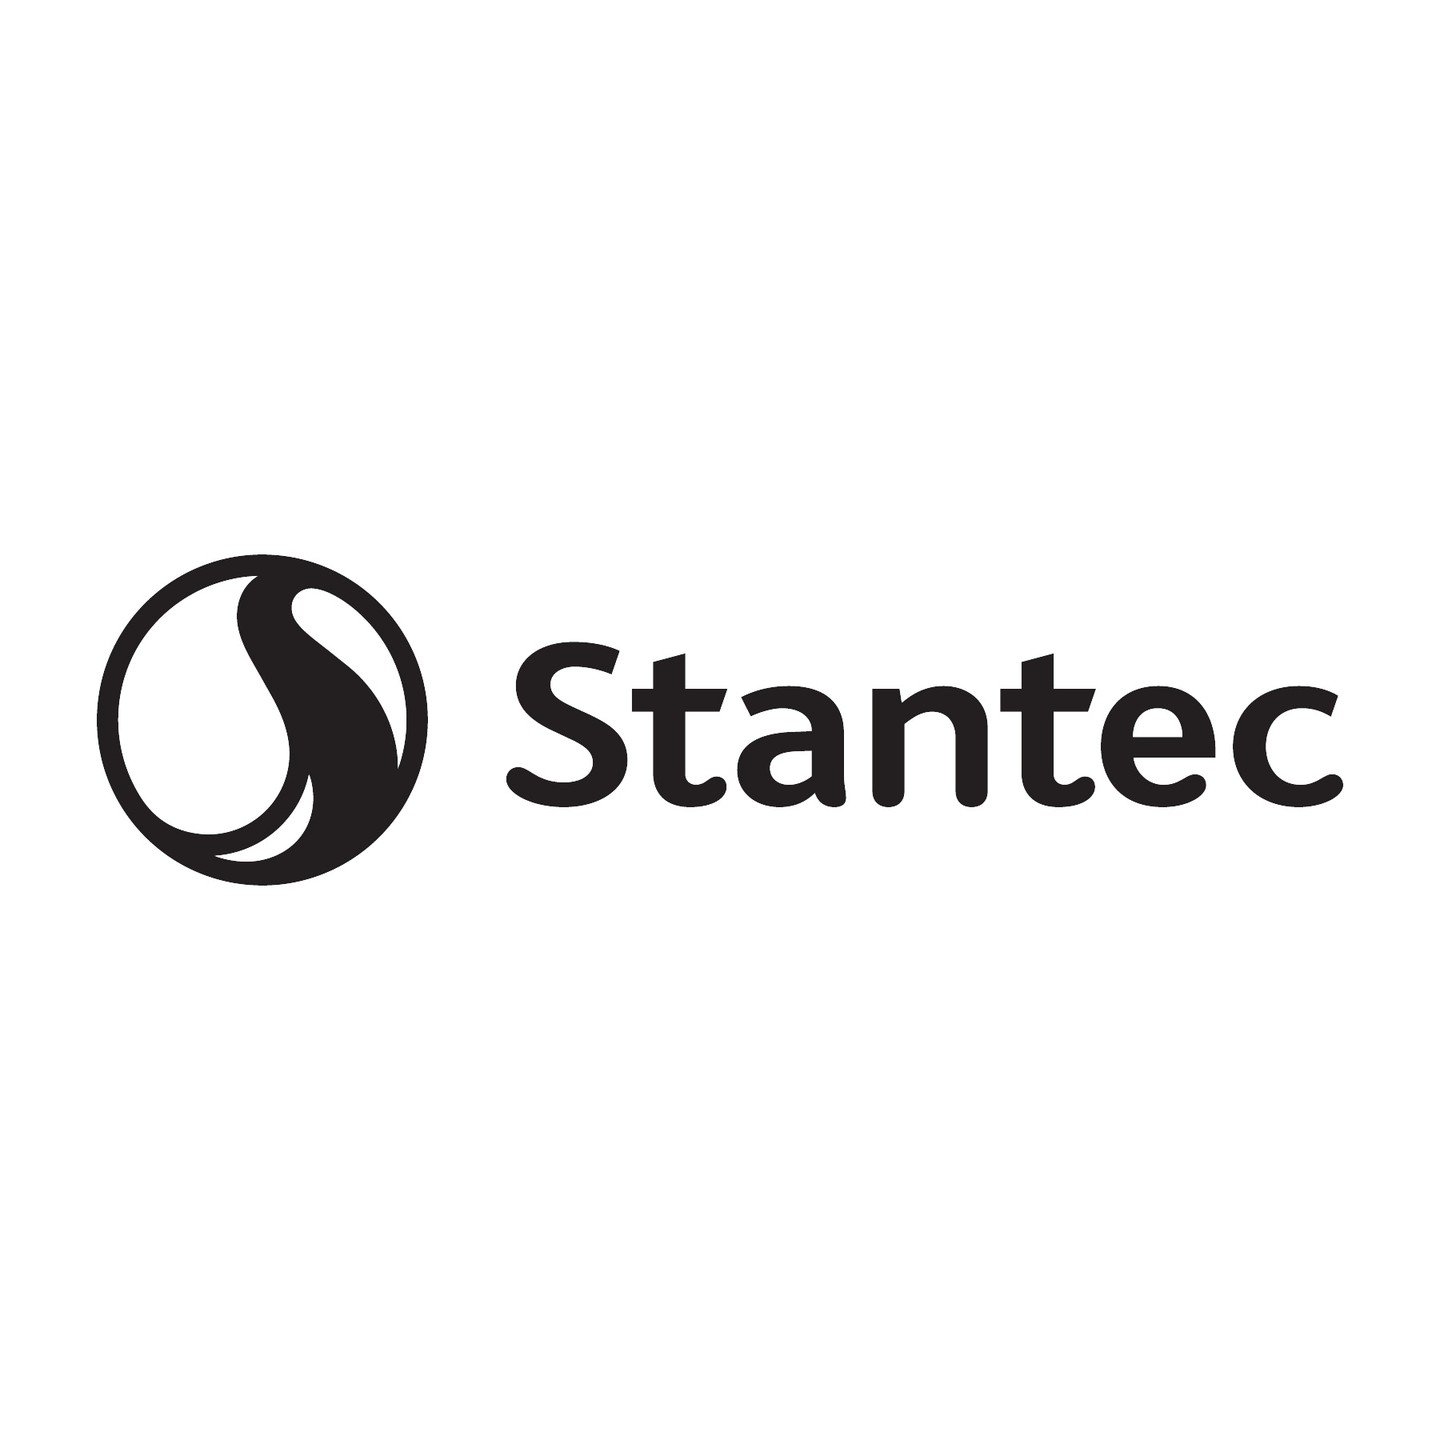 Thank you to @stantec who is a bronze sponsor for Primarily It's a Party 2024!